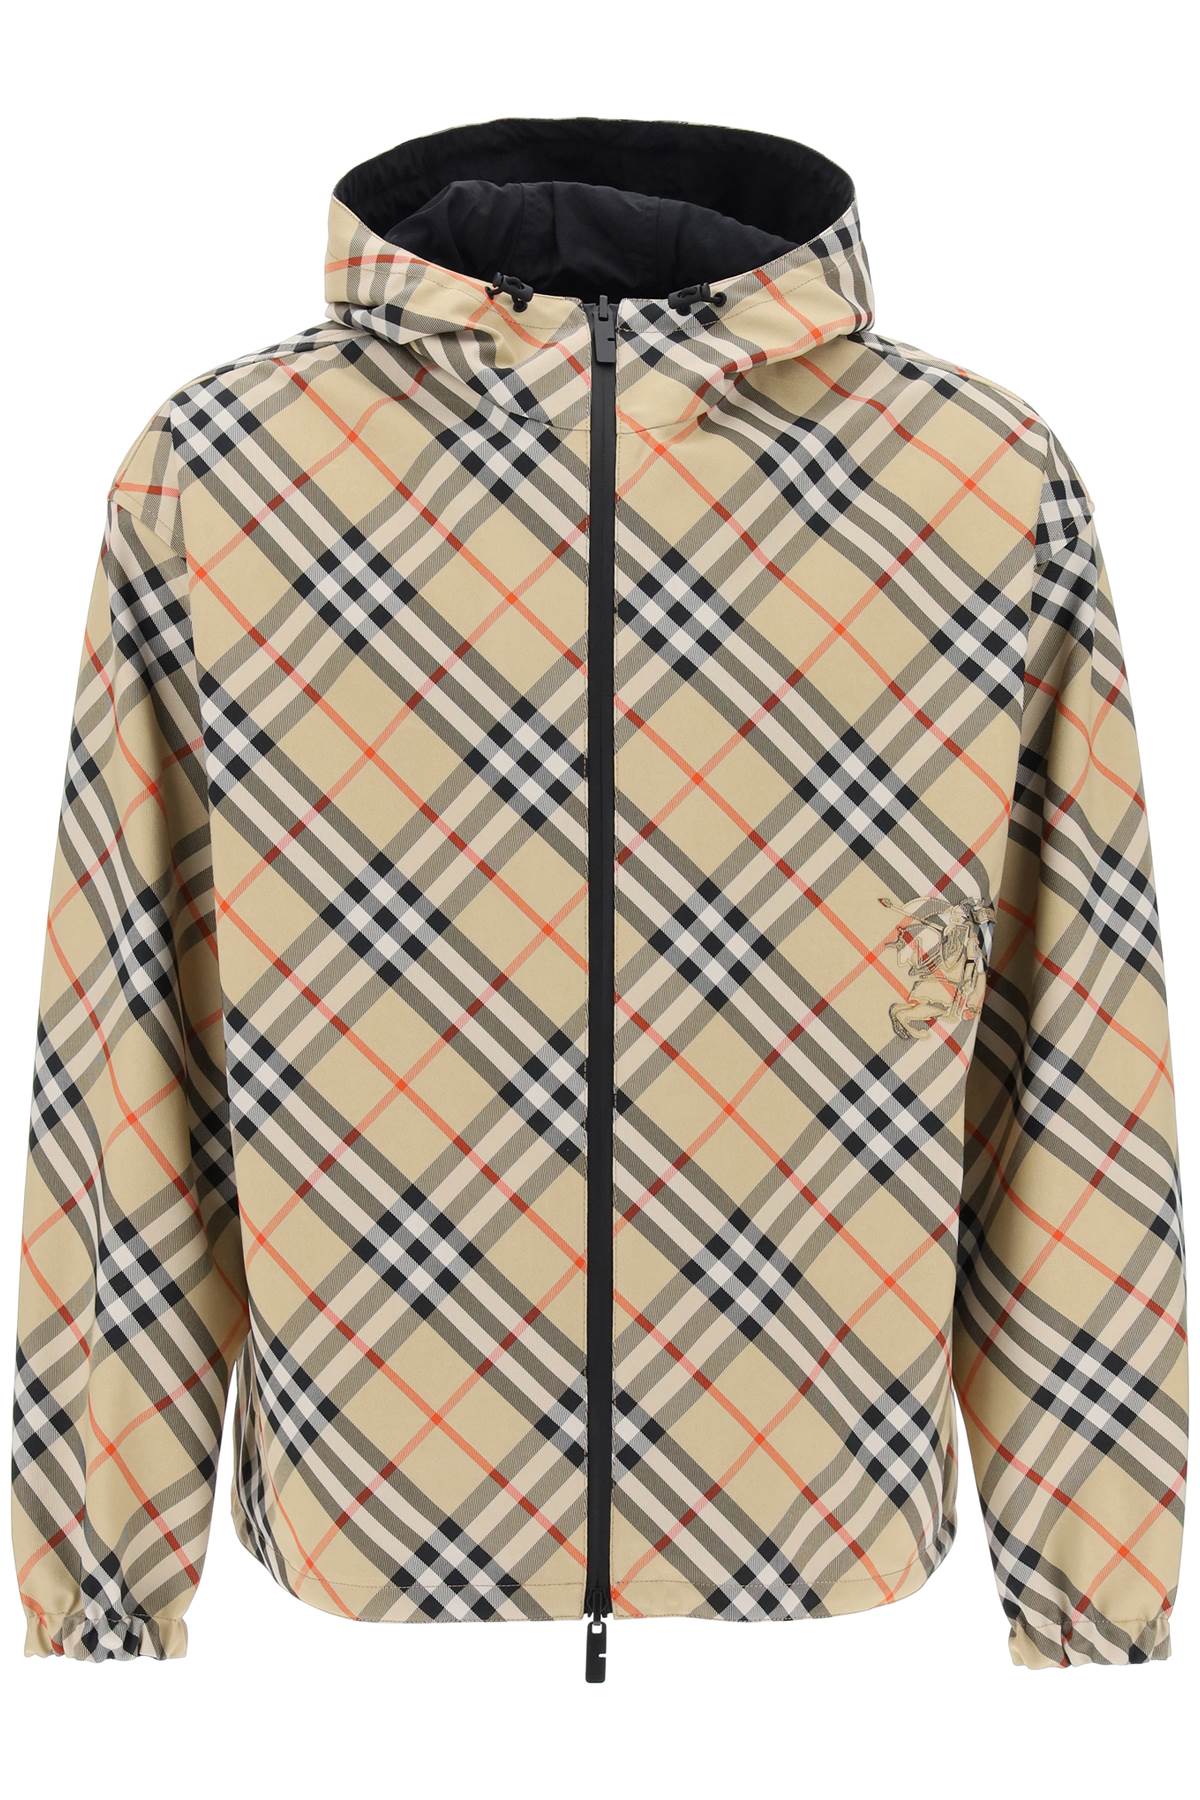 Burberry BURBERRY reversible check hooded jacket with